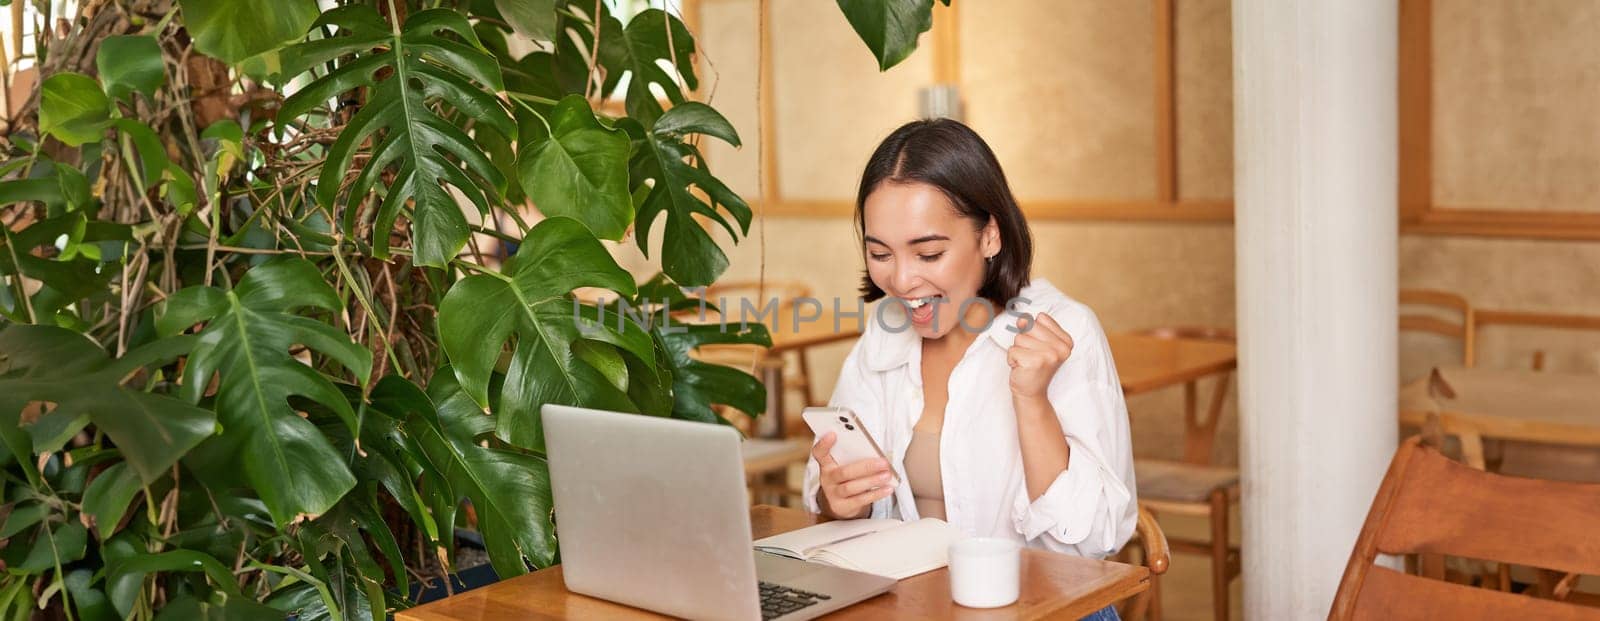 Joyful young asian woman winning, celebrating victory or achievement, receive good news on mobile phone, sitting with laptop and working.